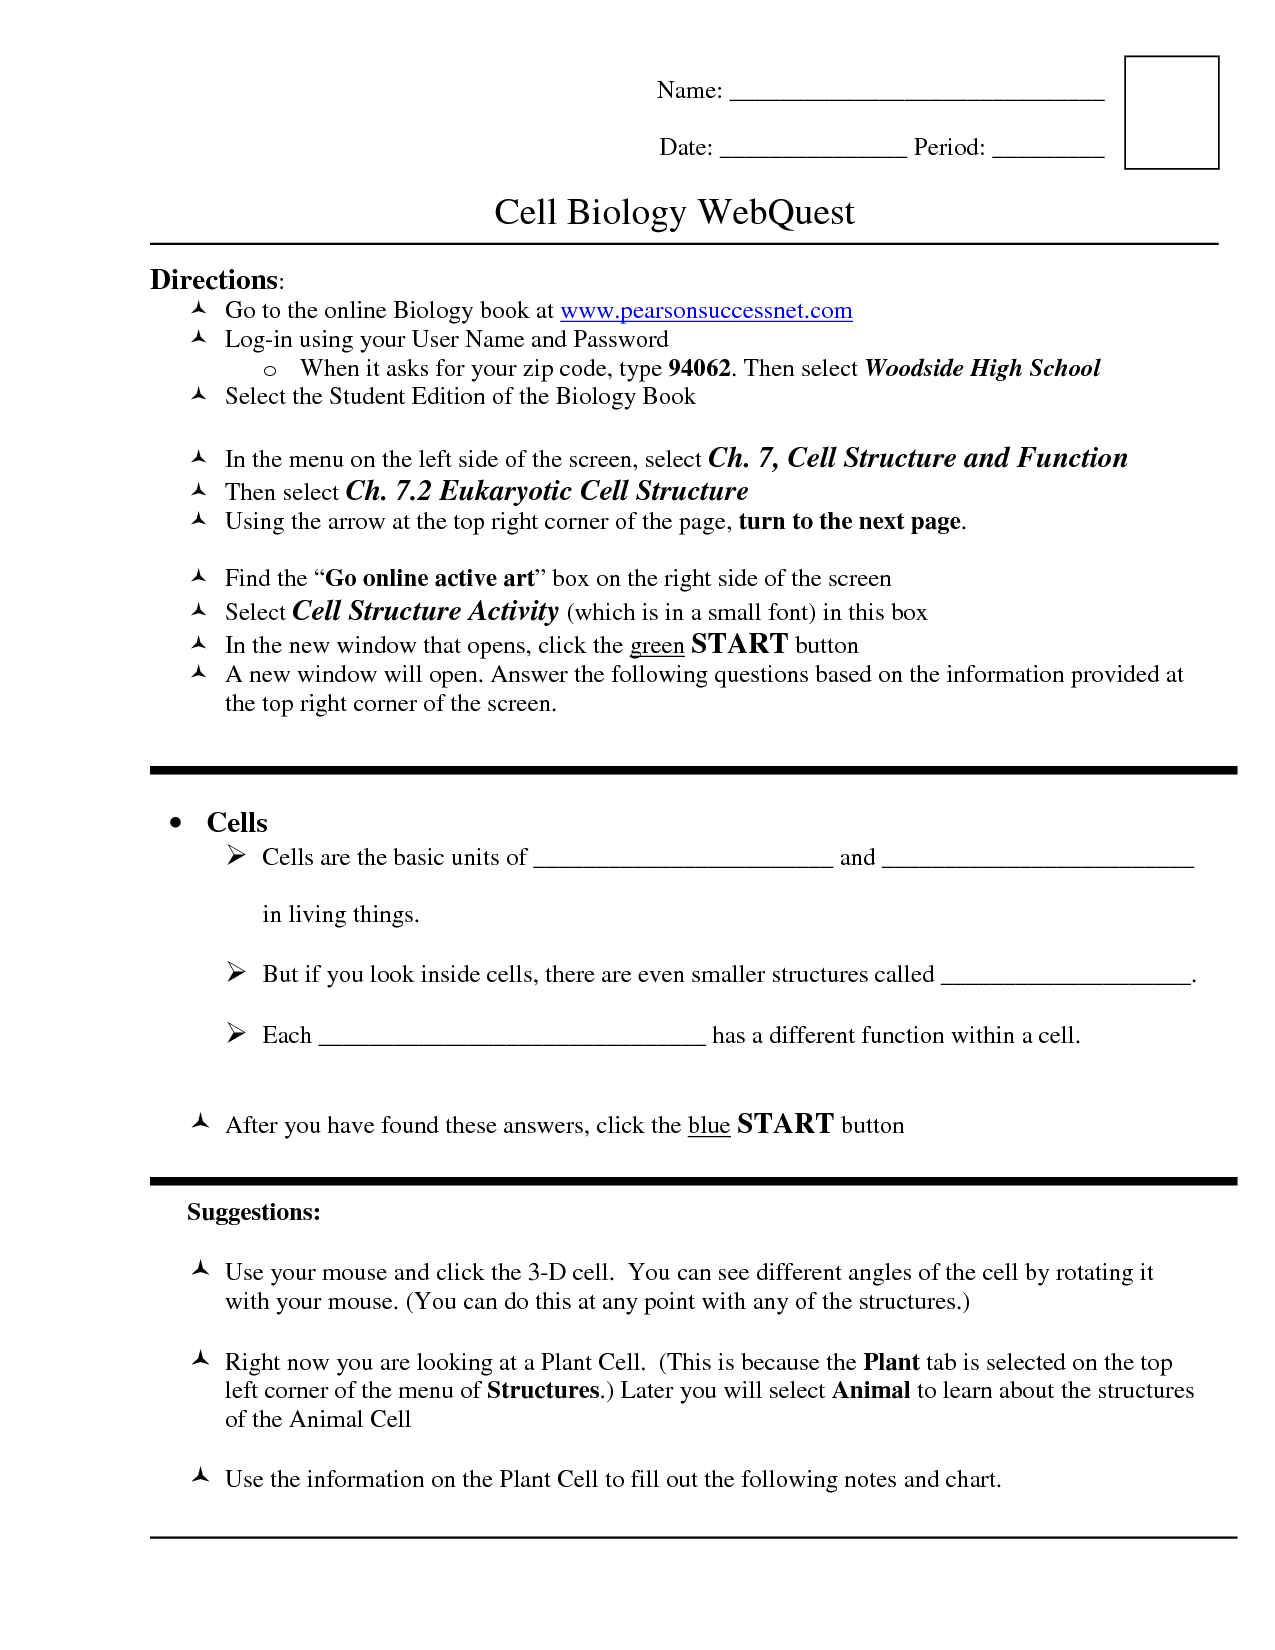 16 Best Images of Miller And Levine Biology Worksheet Answers Pearson